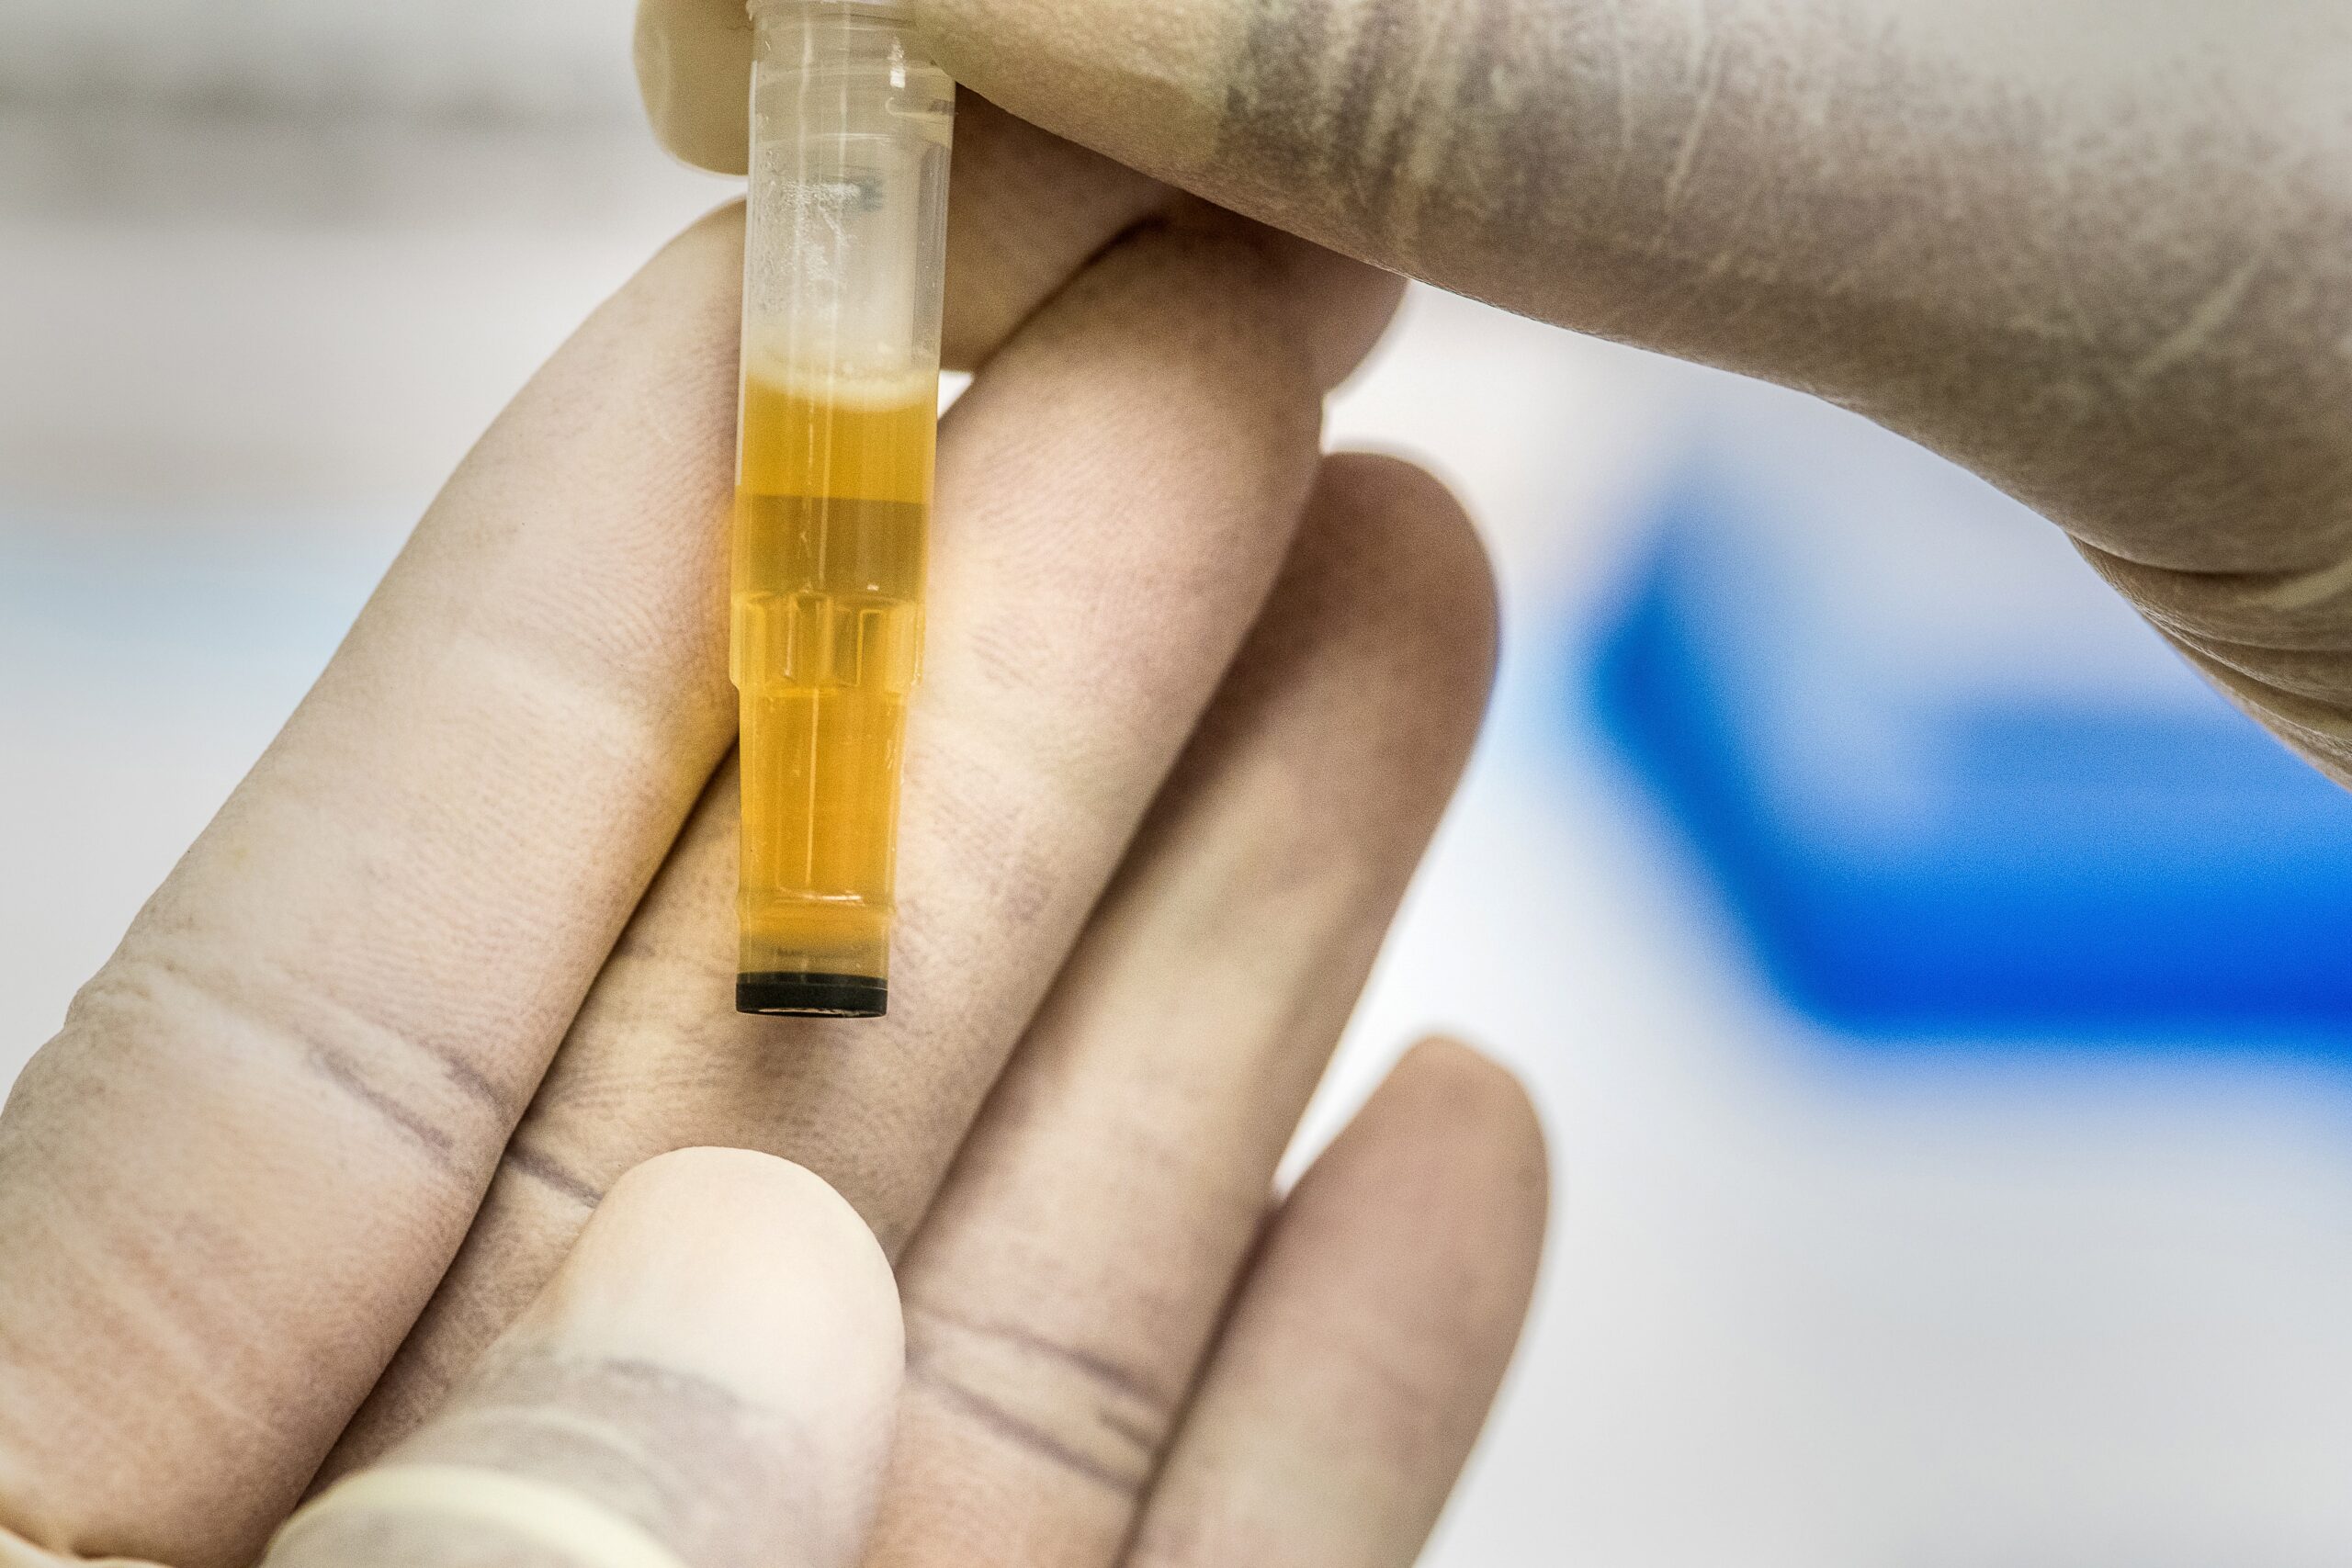 close up of a urine sample held in the hands of someone wearing latex gloves